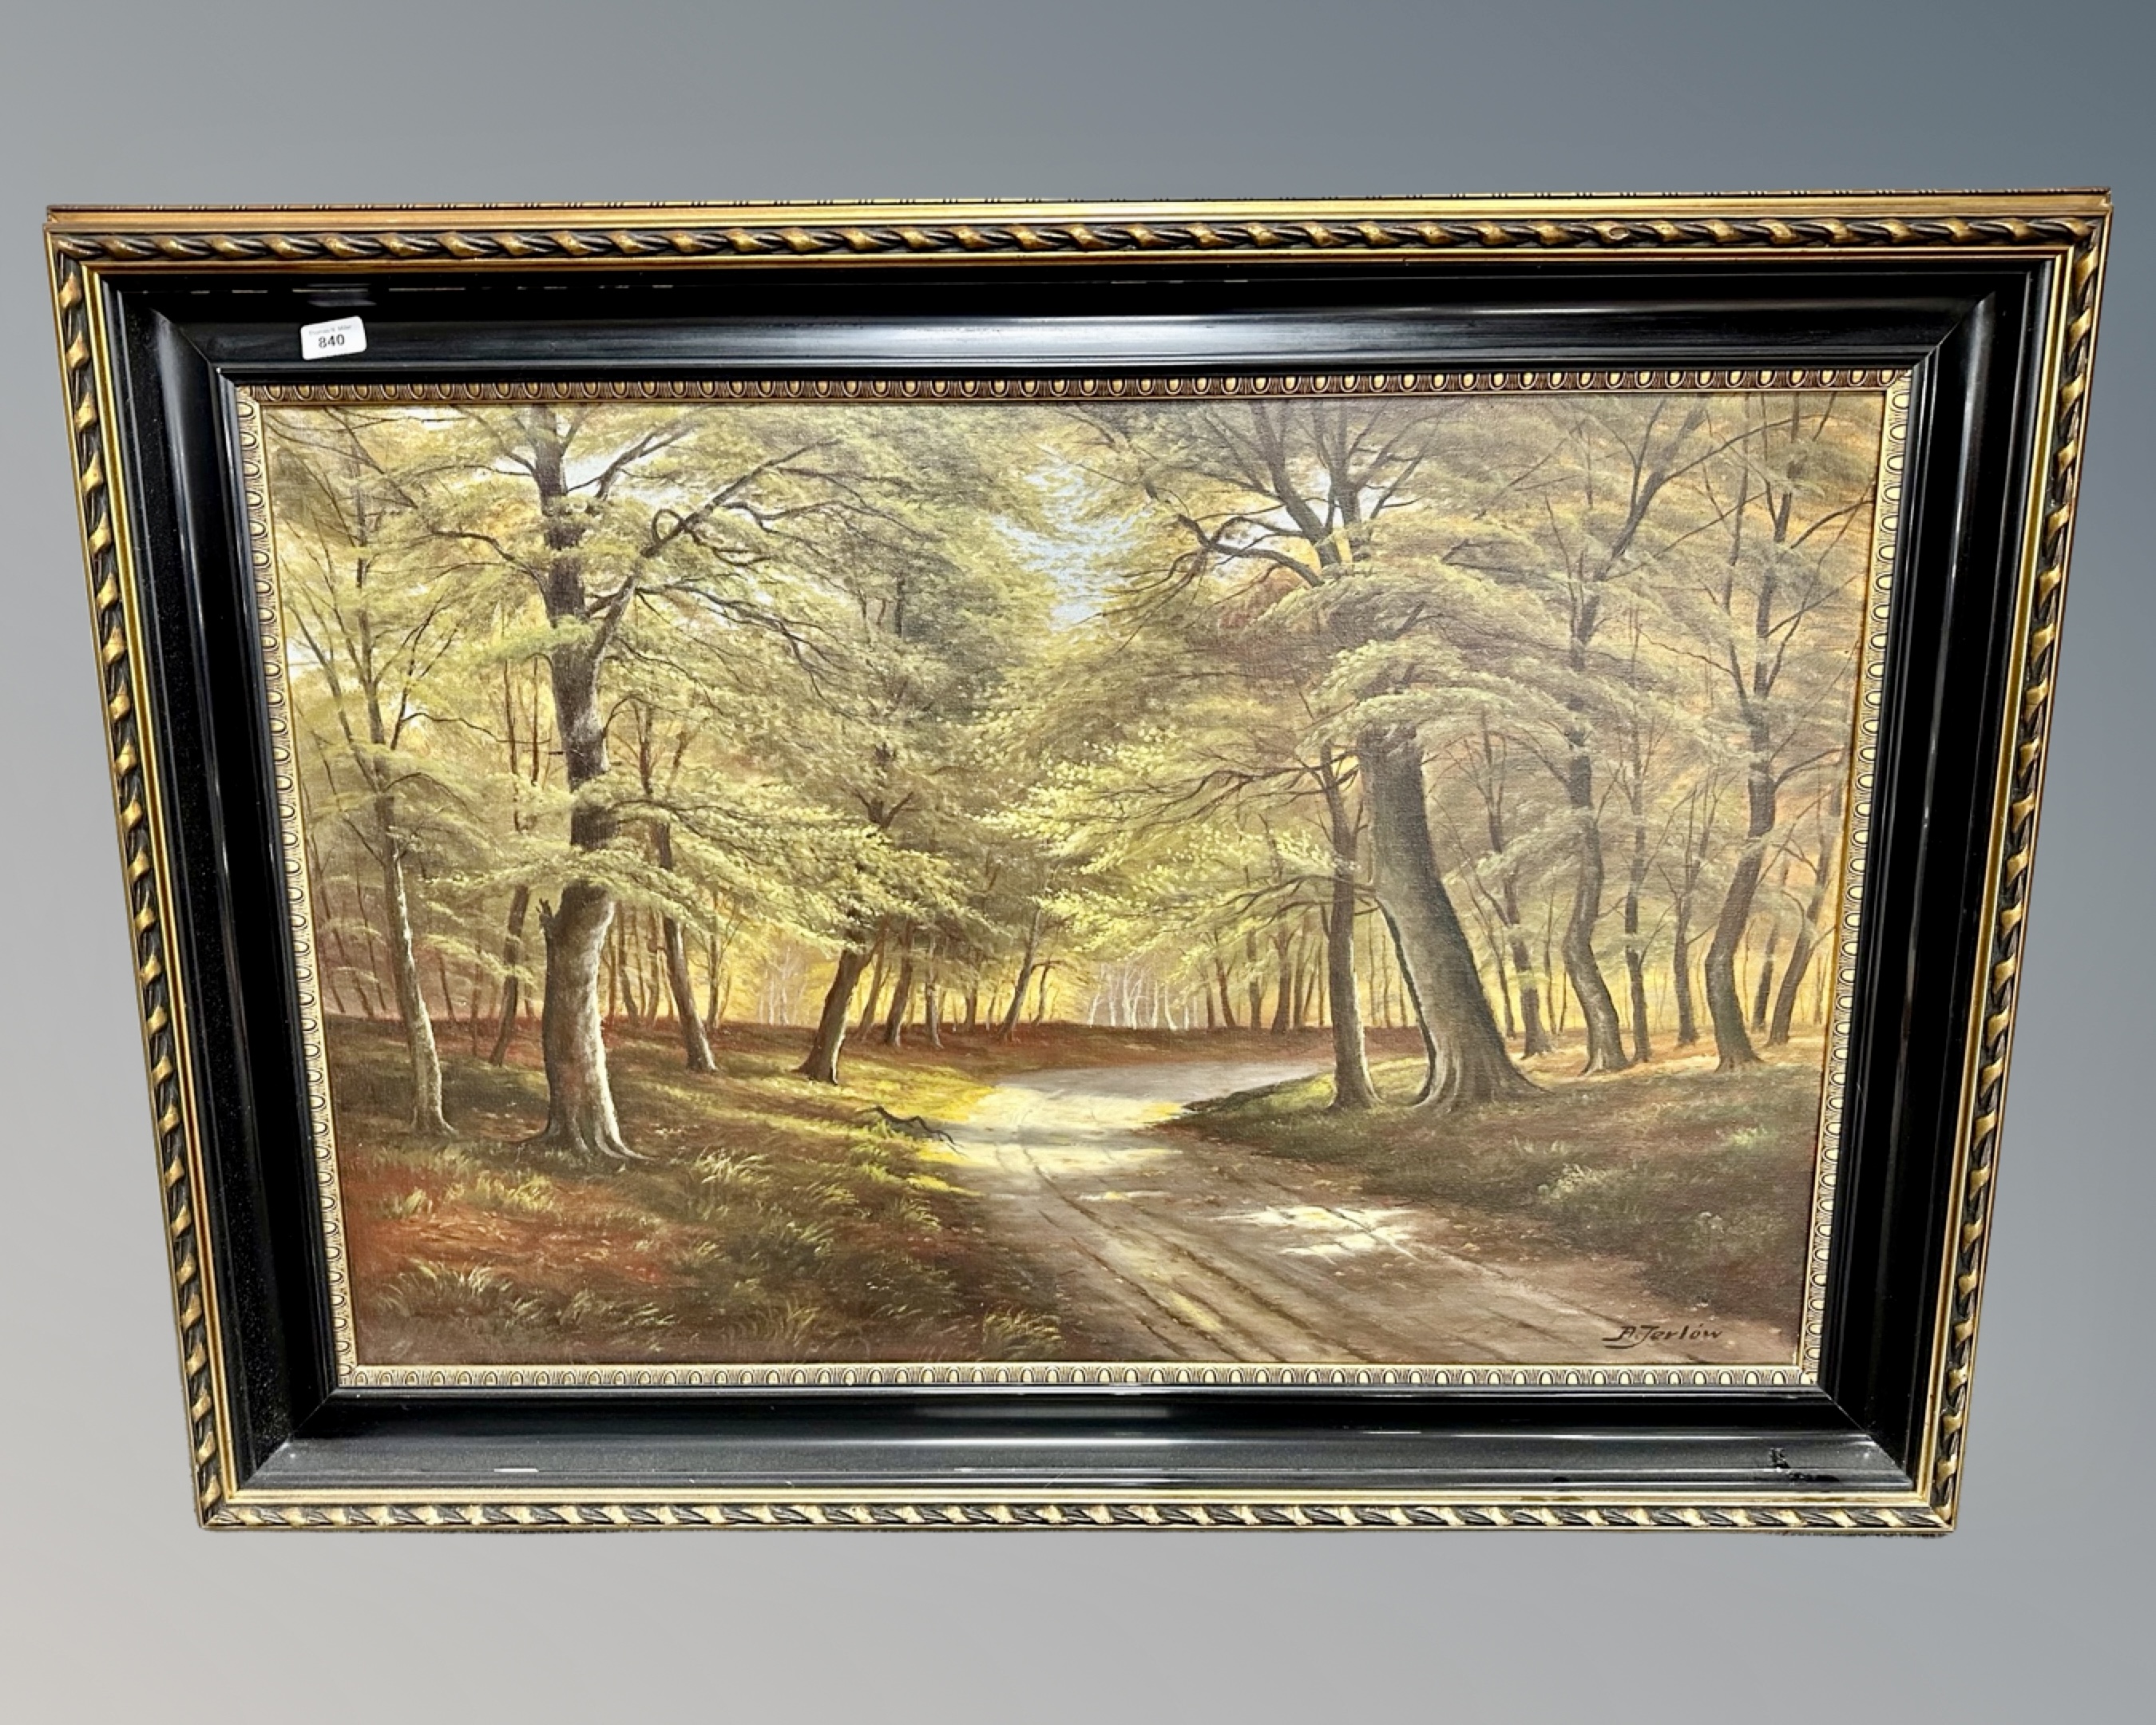 A. Jerlow : A track leading through a forest, oil on canvas, 99cm by 64cm.